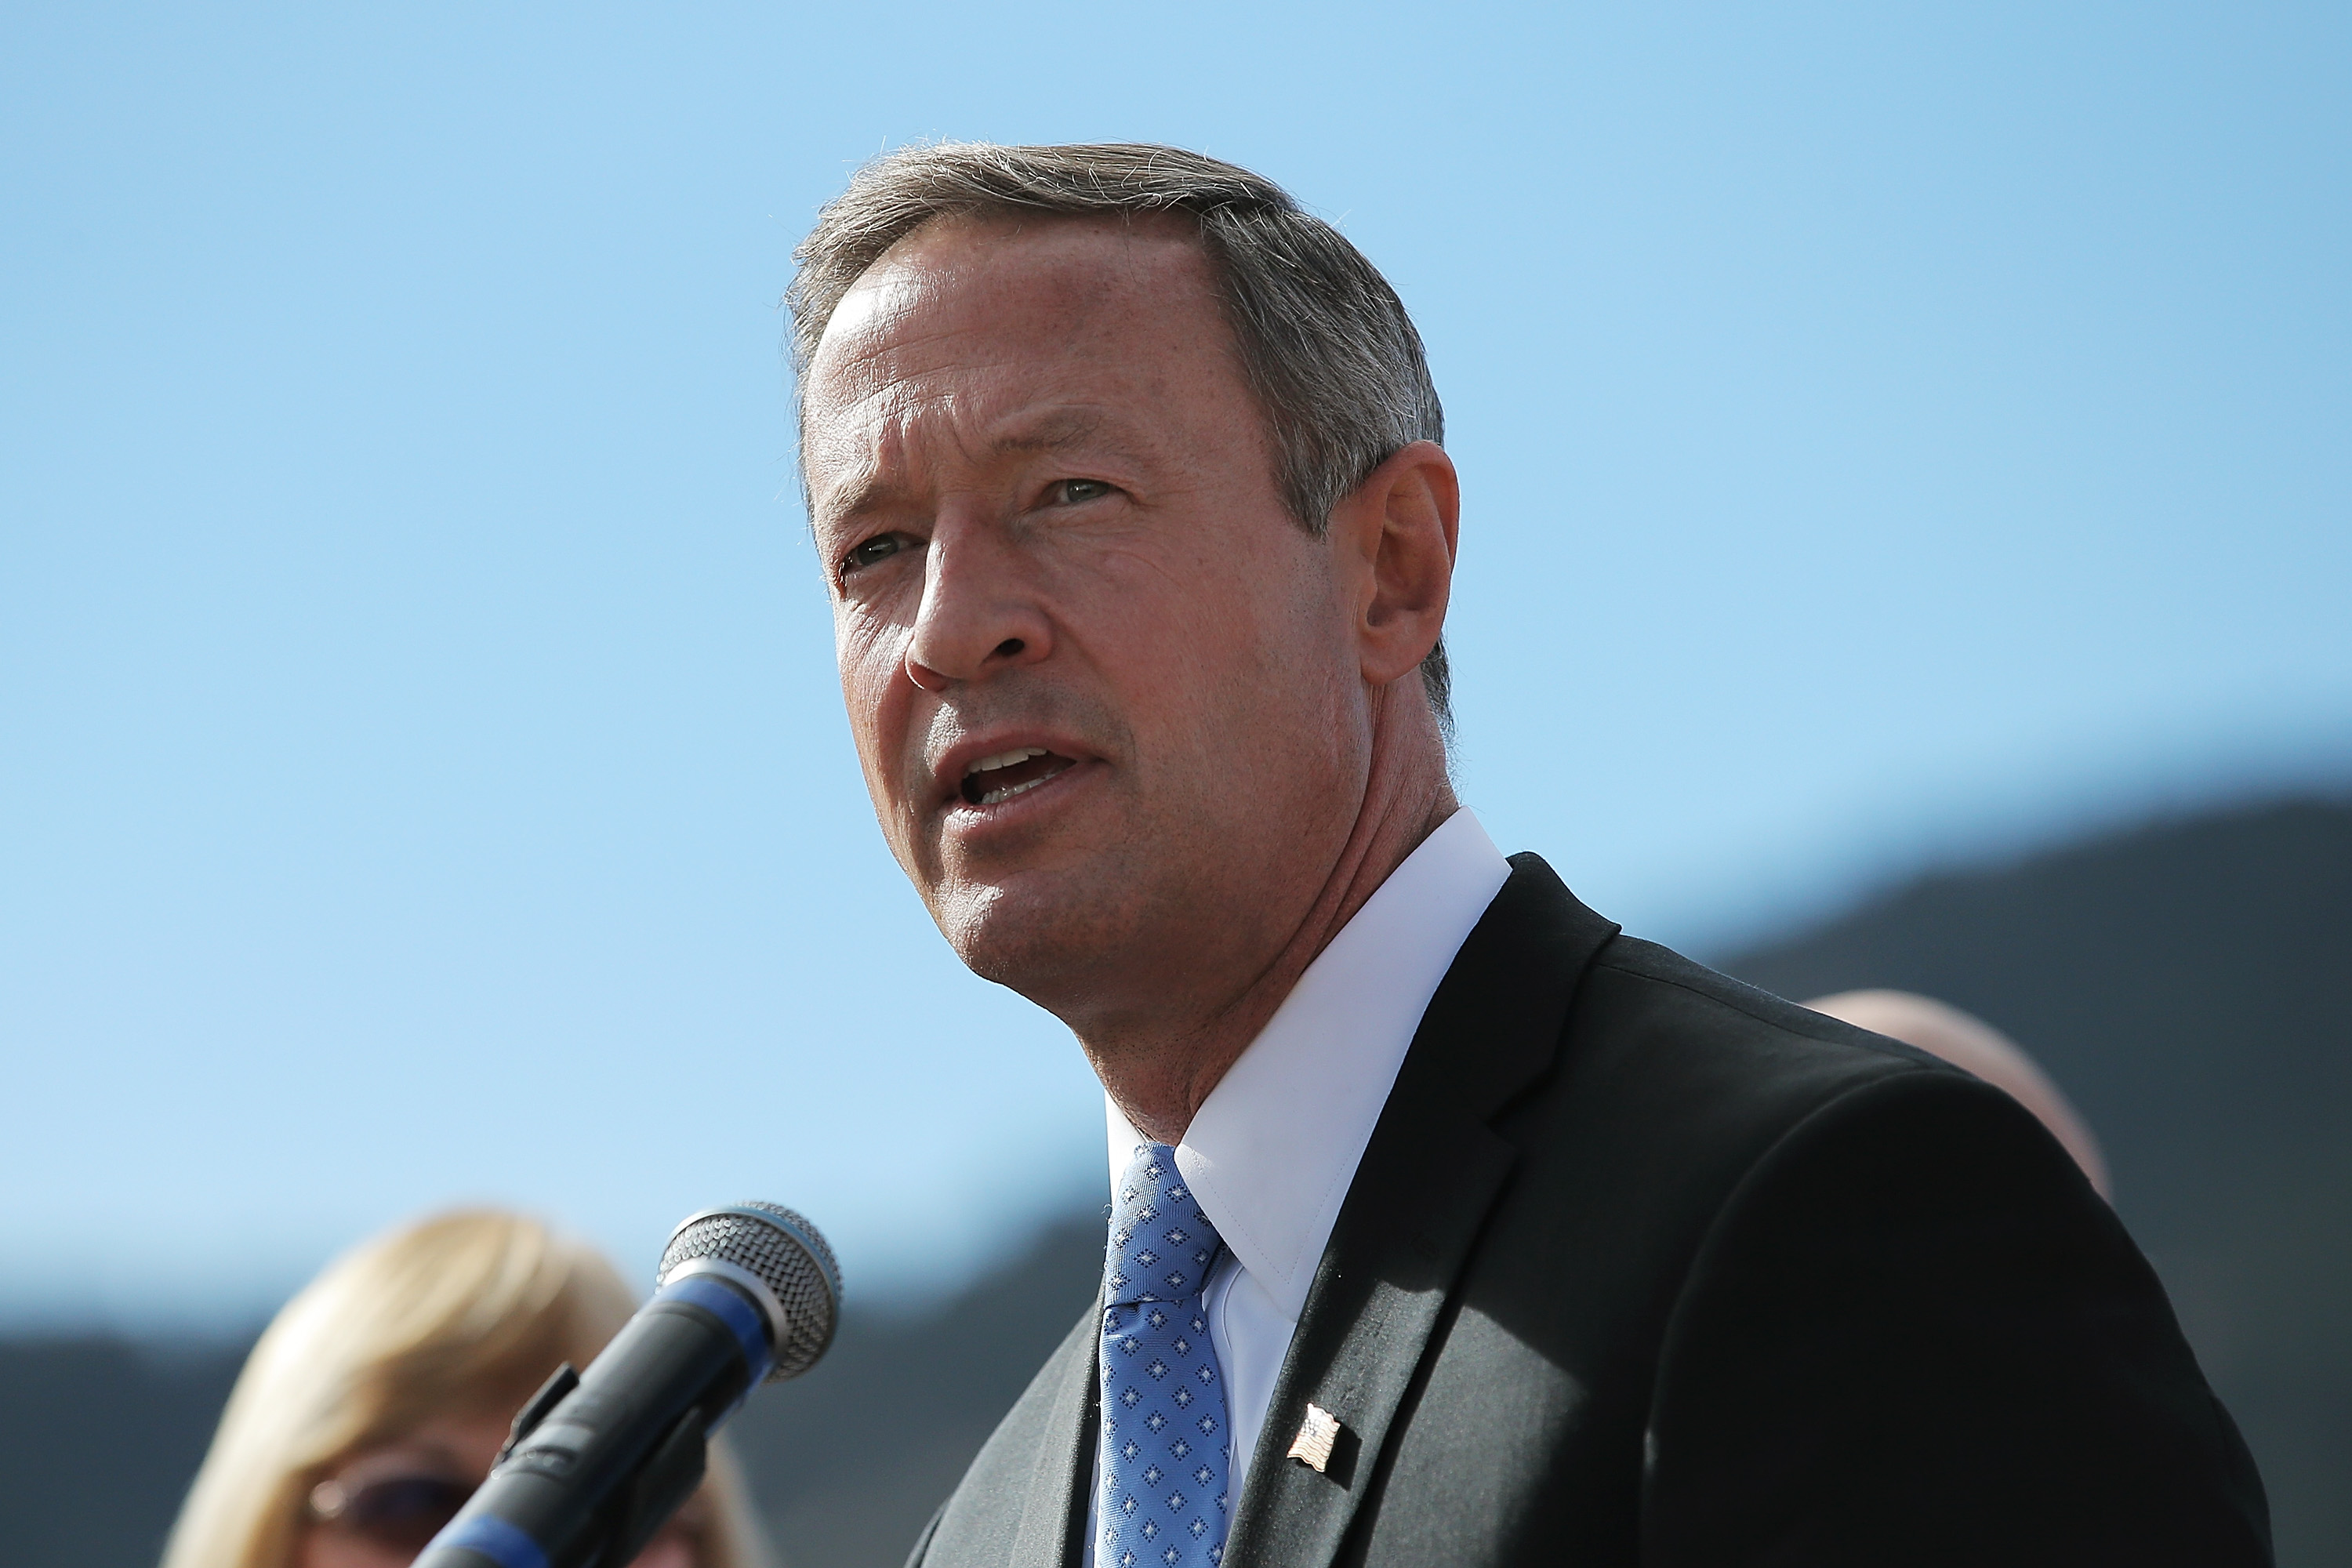 Martin O'Malley speaks hours before a Republican presidential debate in Boulder, Colo., on Oct. 28, 2015 (Andrew Burton—Getty Images)